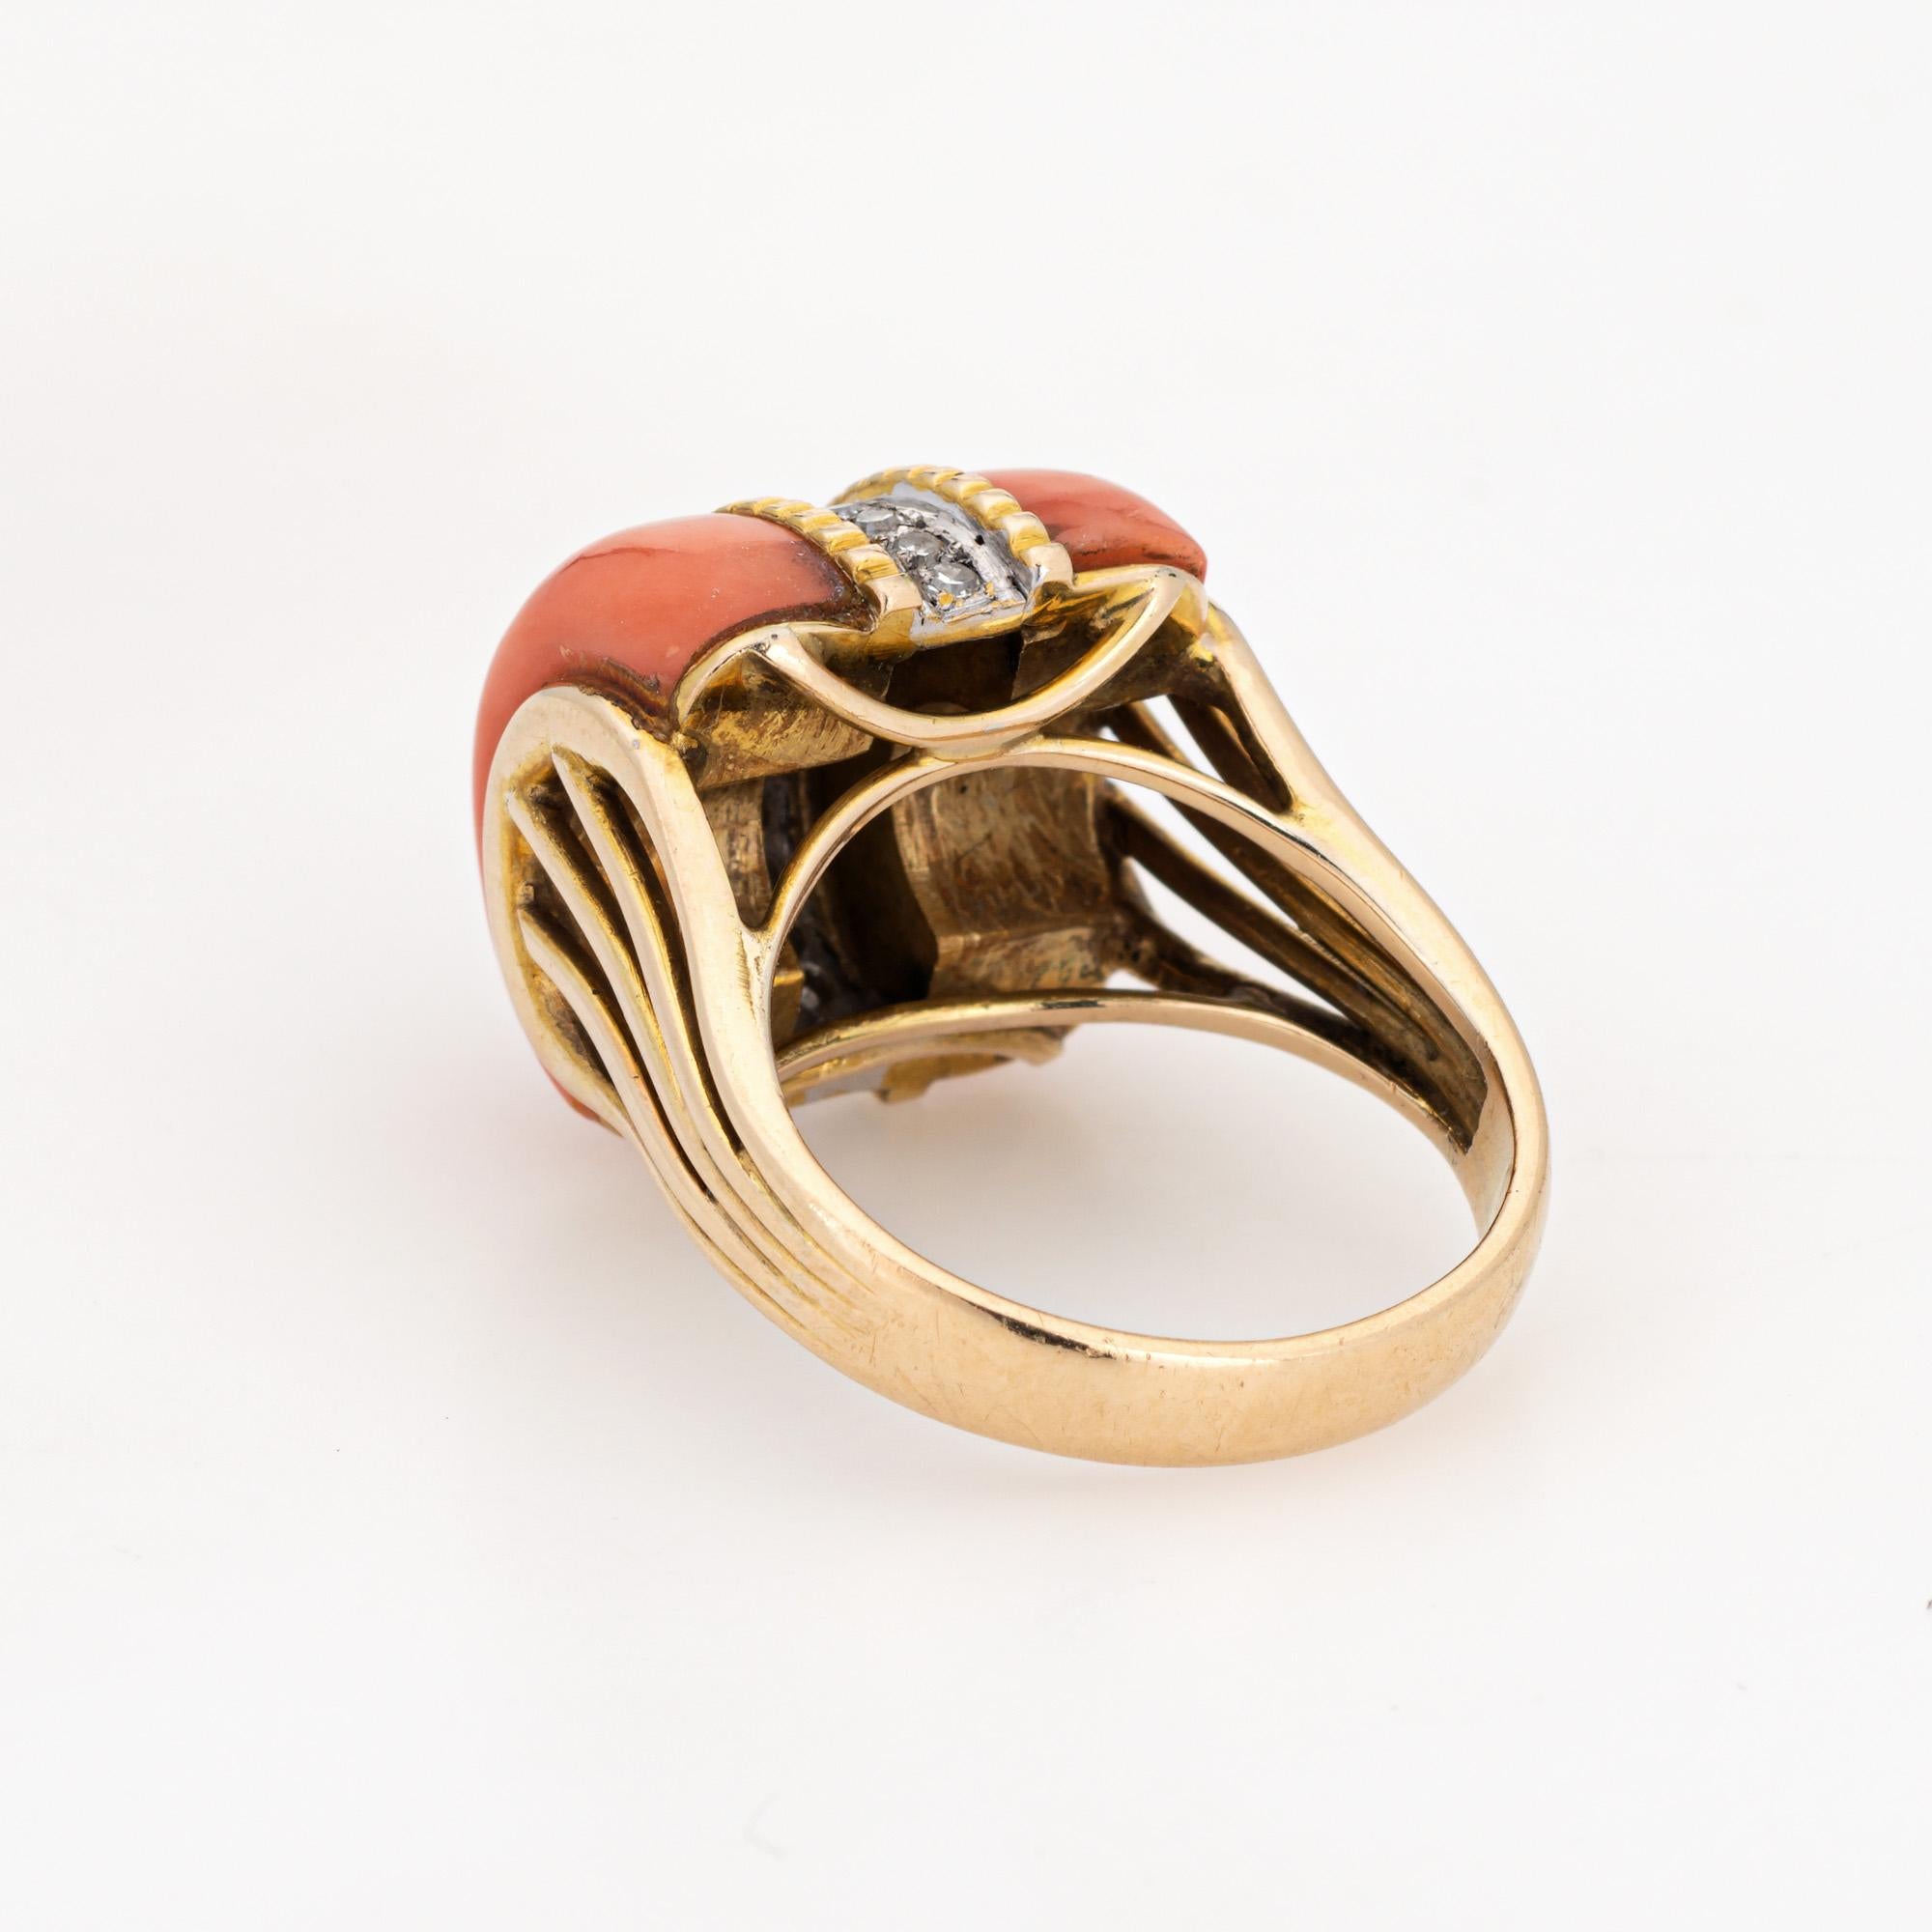 70s Coral Diamond Dome Ring Vintage 14k Yellow Gold Sz 5.5 Cocktail Jewelry In Good Condition For Sale In Torrance, CA